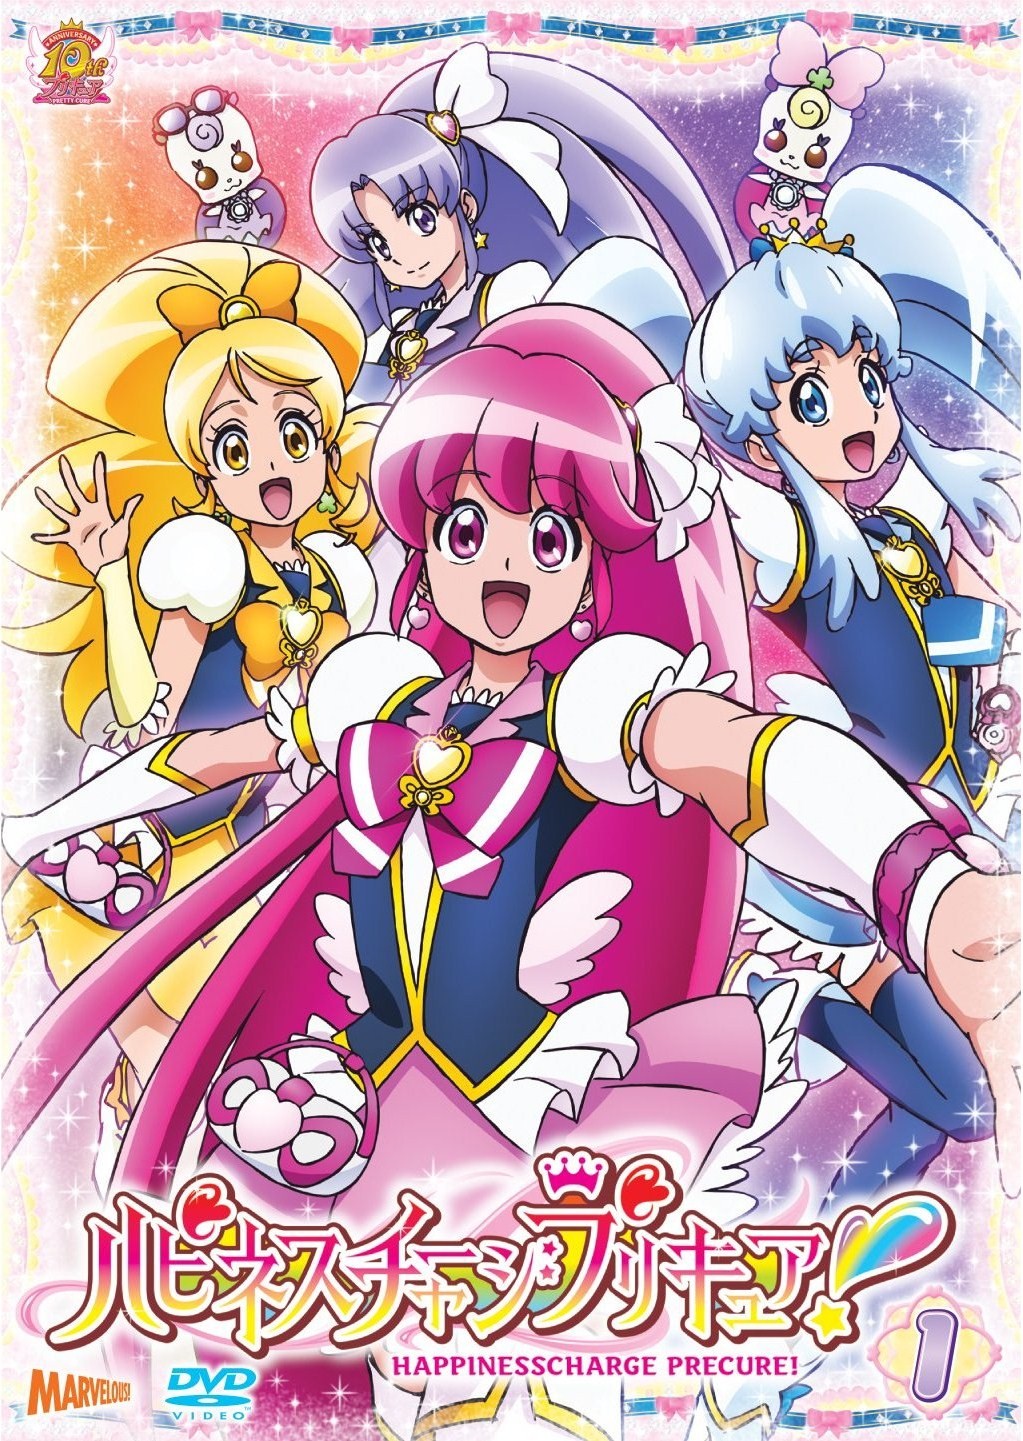 Happiness Charge Pretty Cure! DVD and Blu-ray | Pretty Cure Wiki